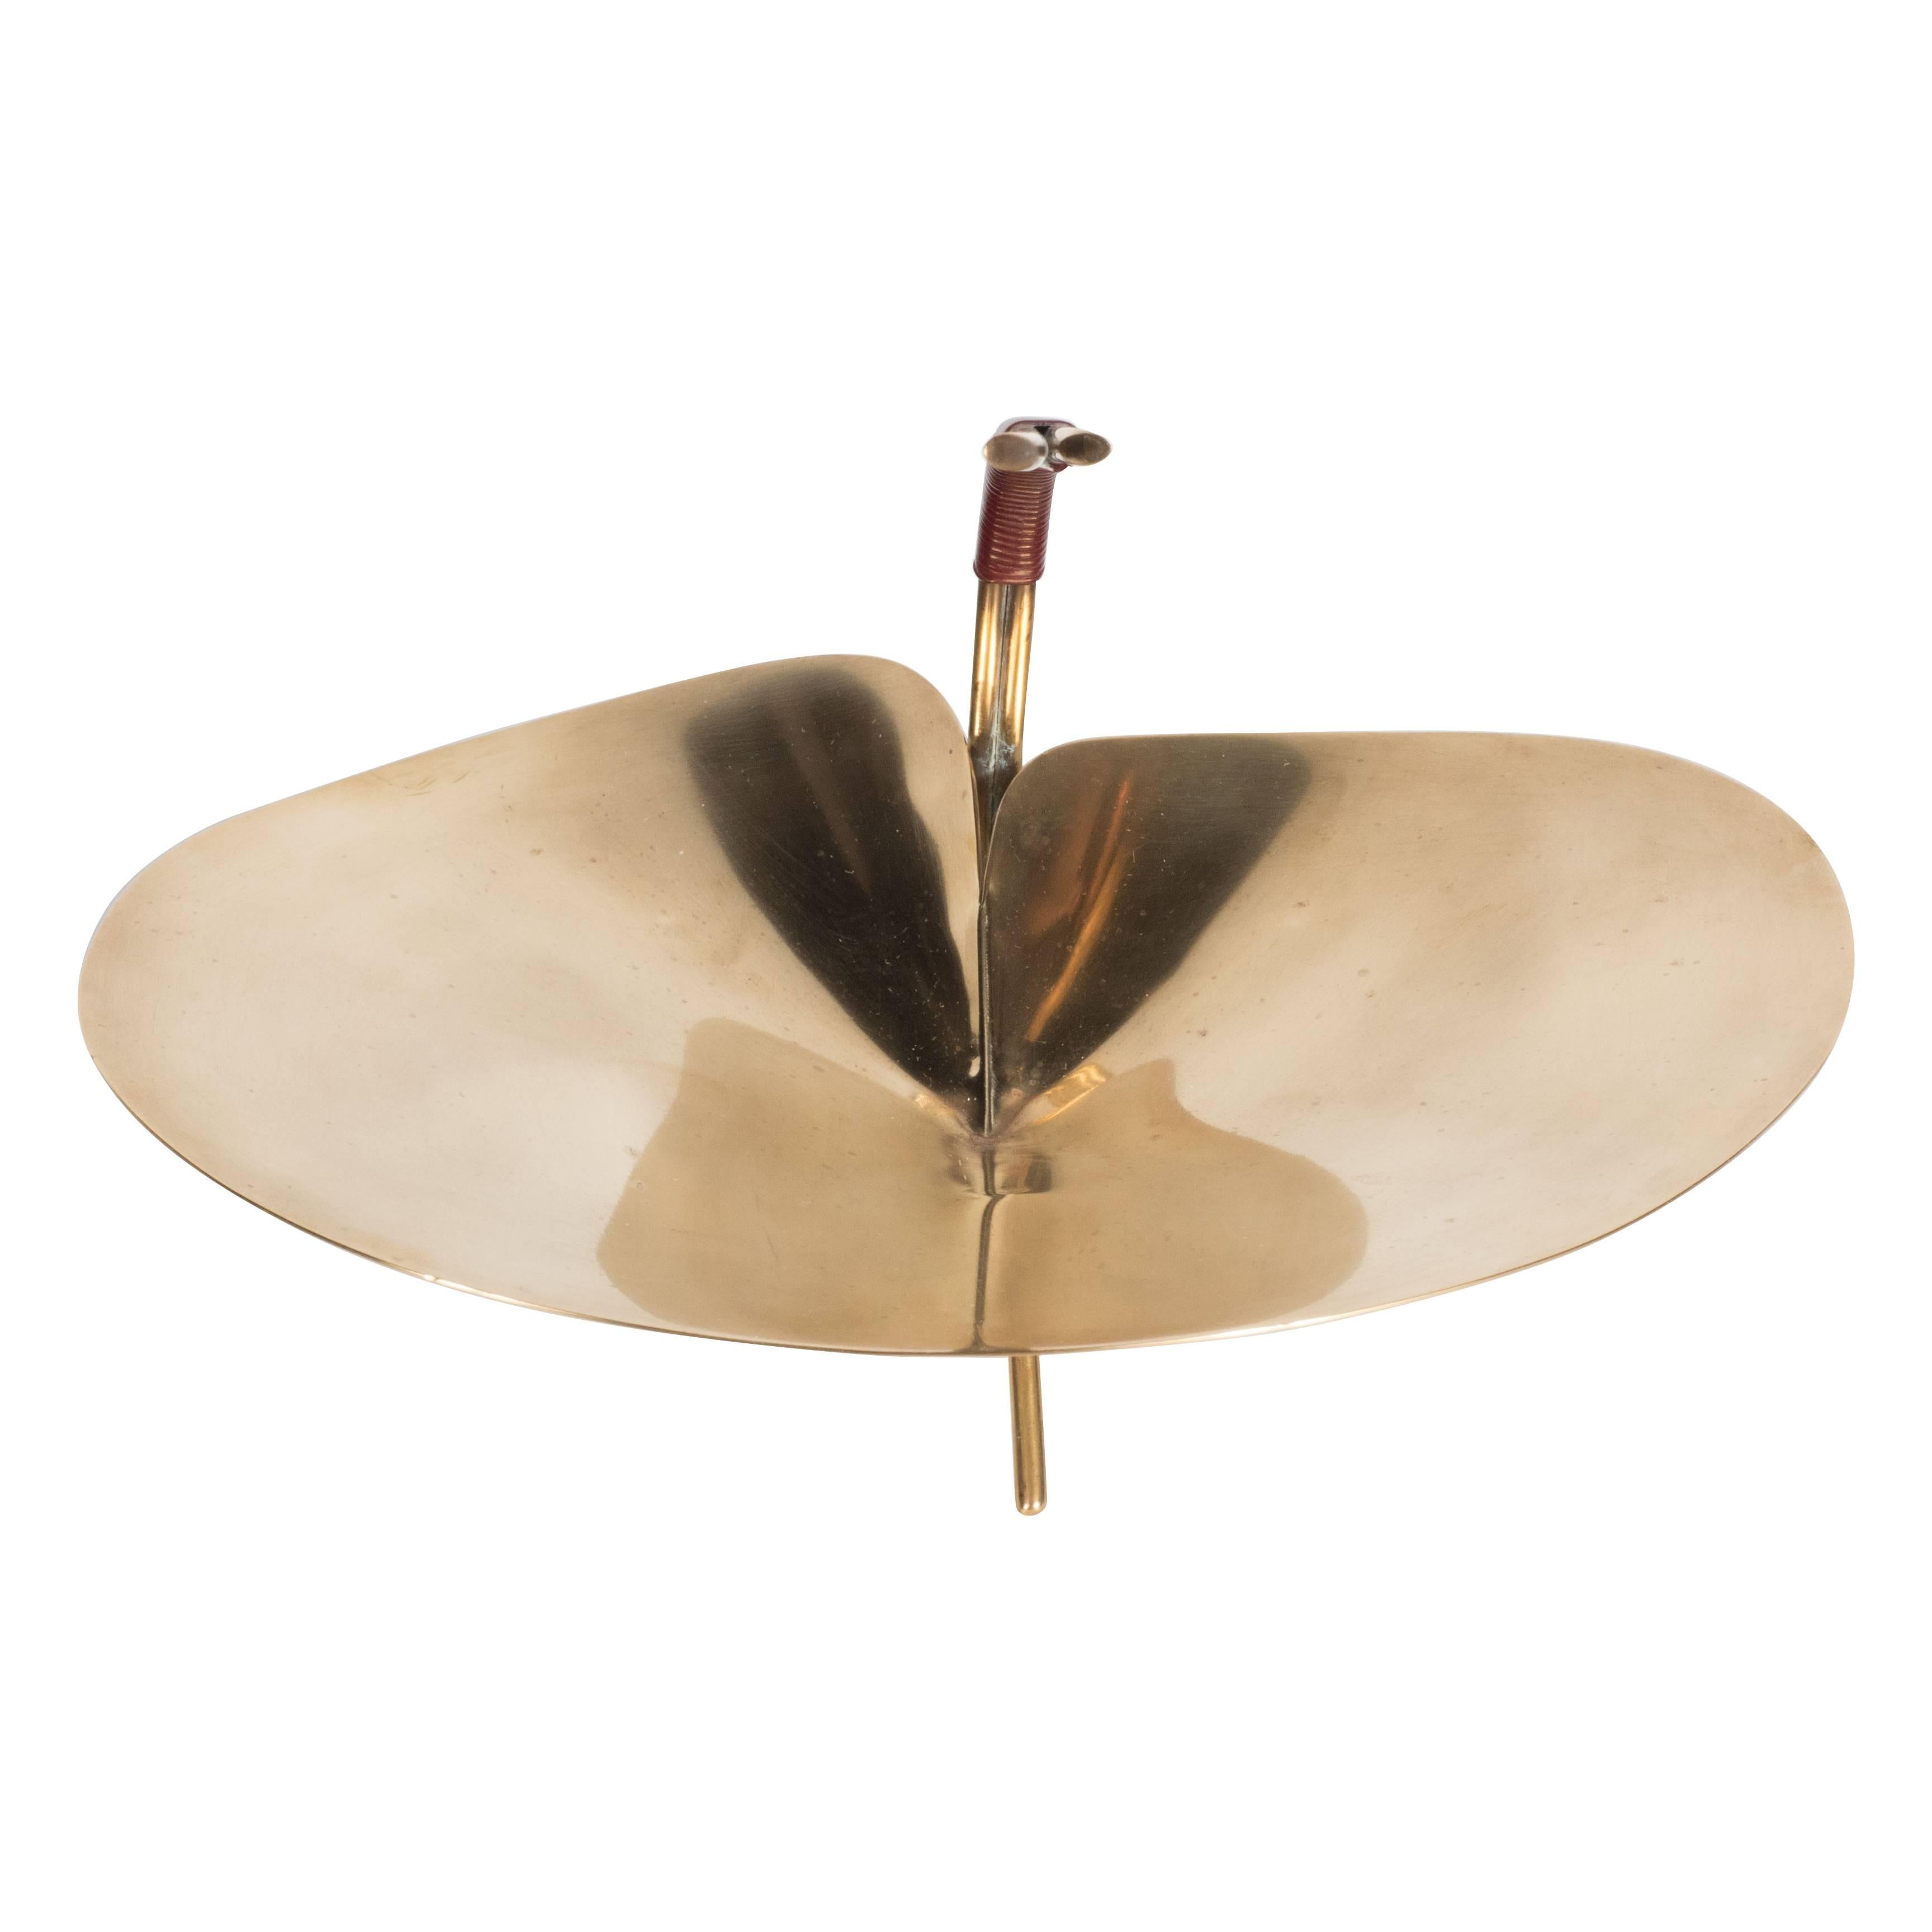 A Mid-Century Modern polished brass lilypad dish by Carl Auböck. Three pronged tubular brass feet support a single sheet of polished brass in the form of a lilypad. A double-stem wrapped in tightened rattan banding merges them together. This piece